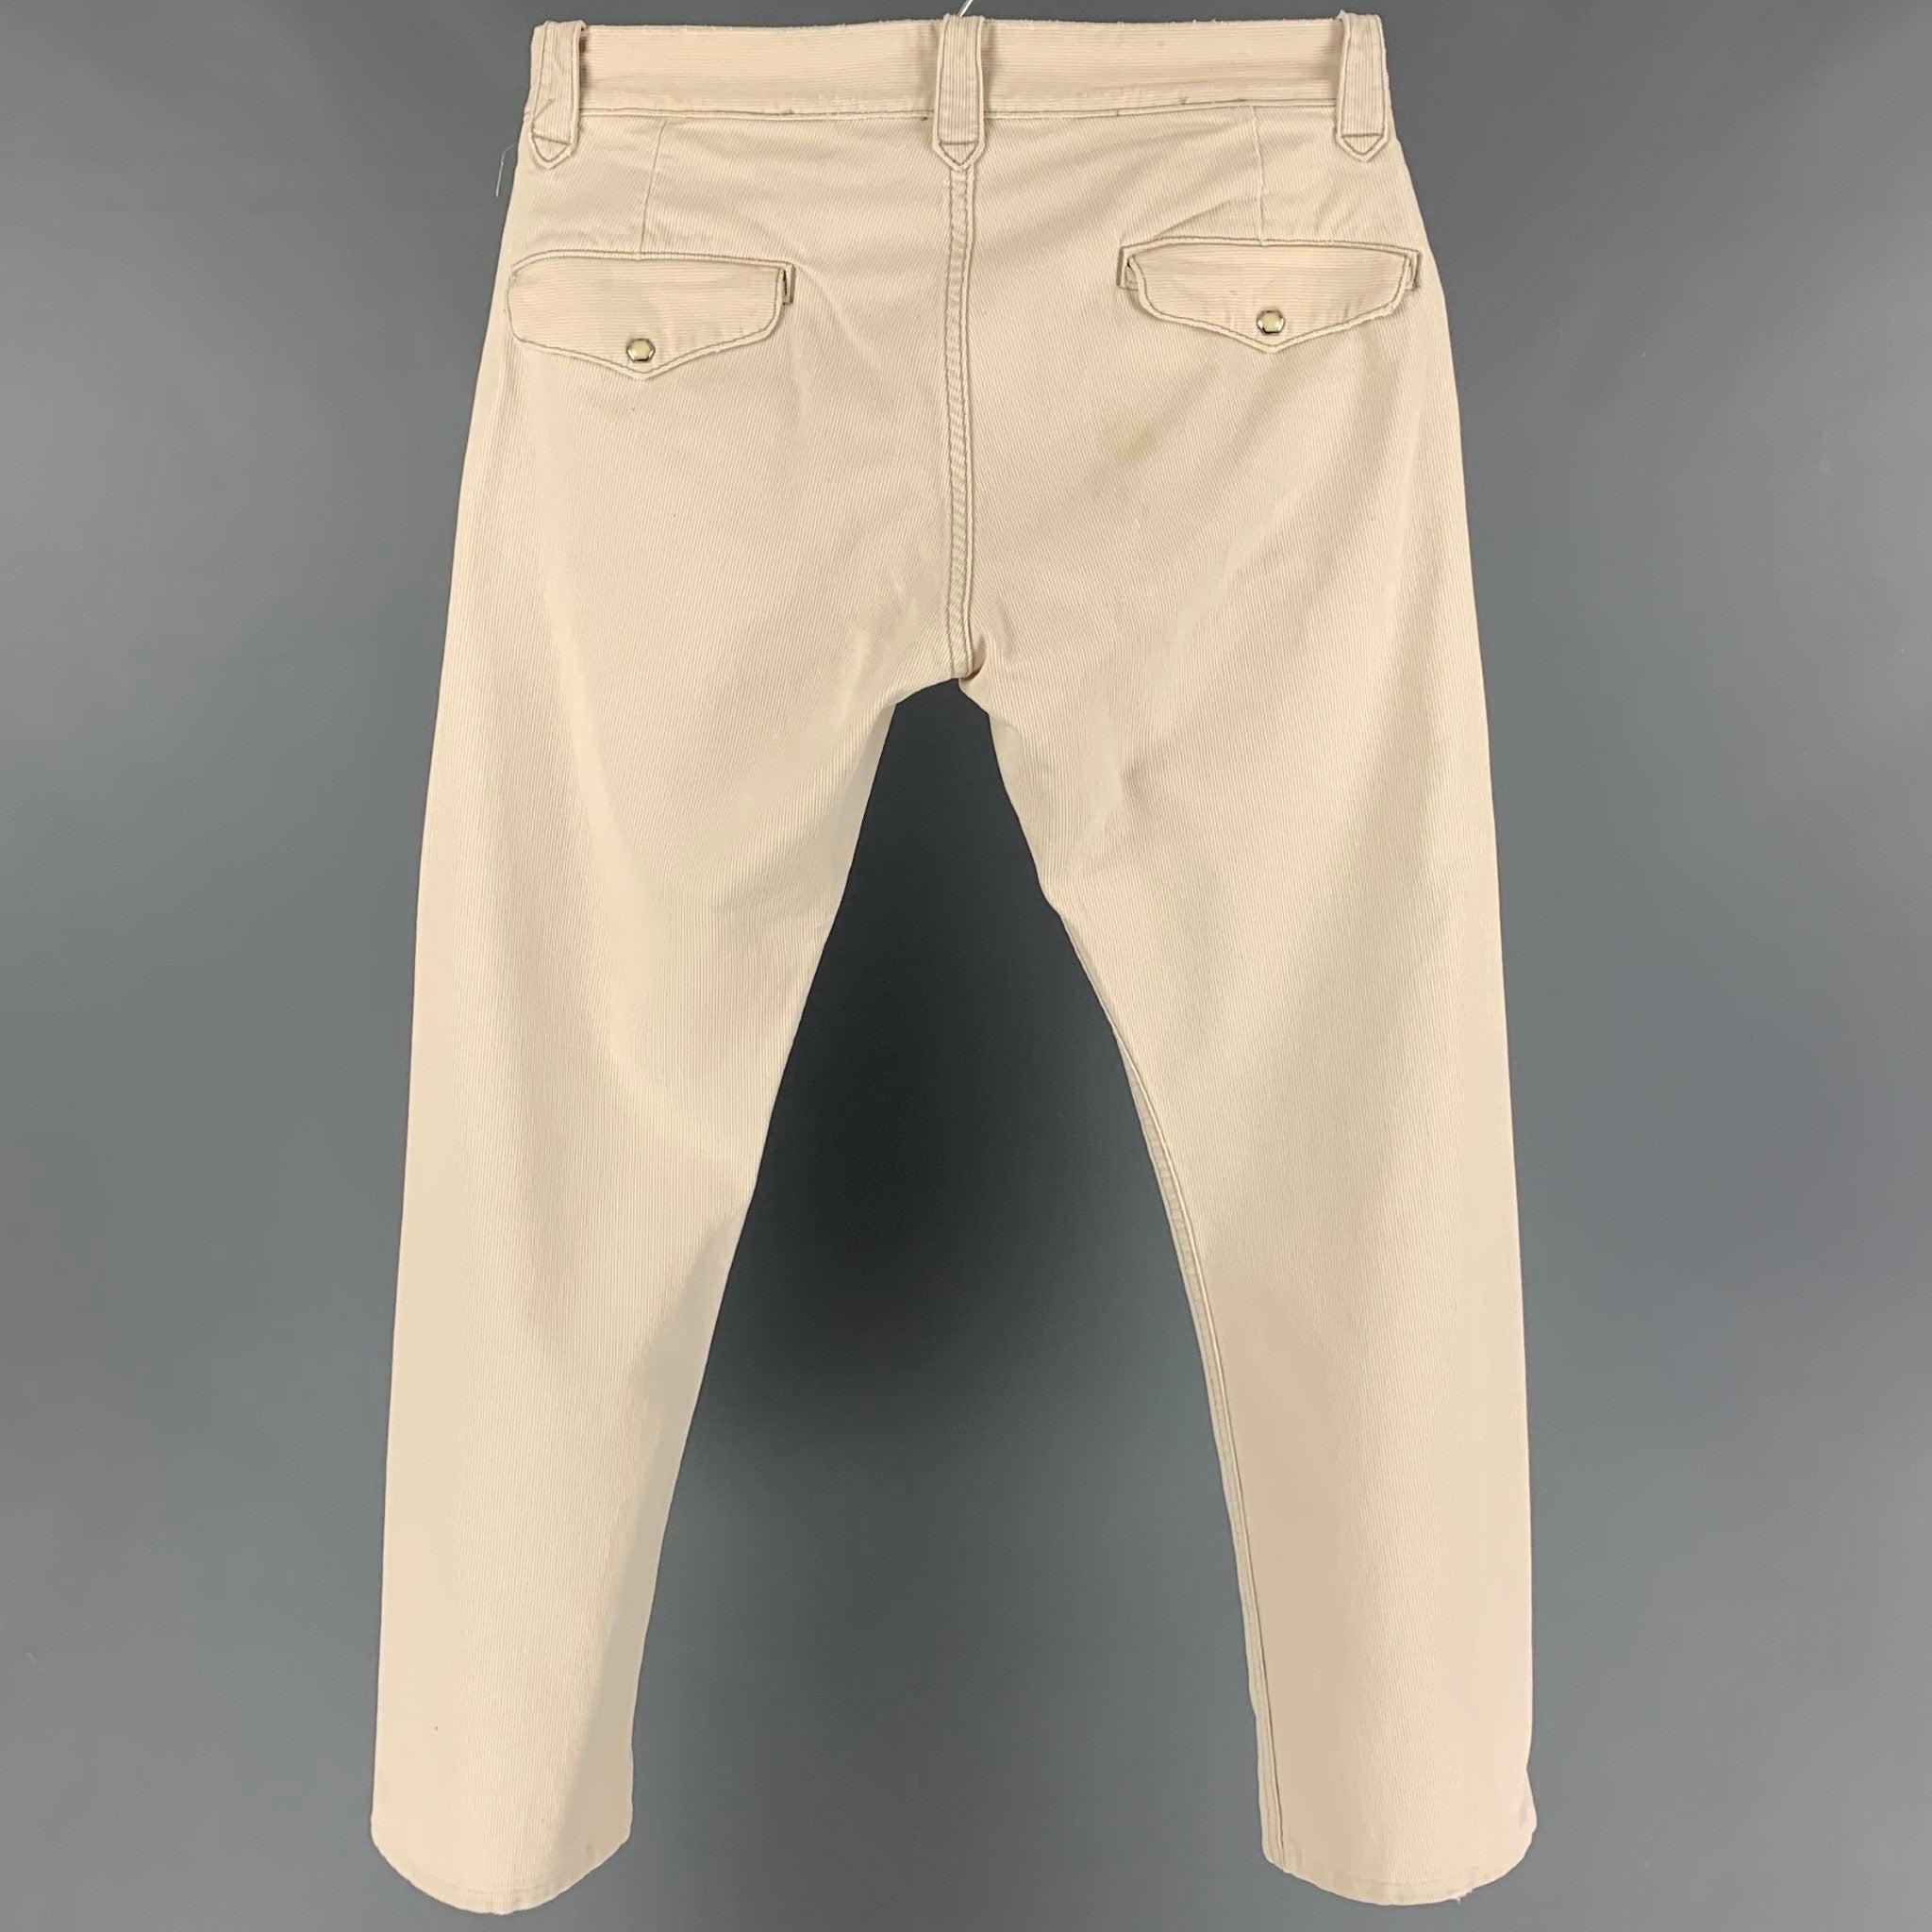 RRL by RALPH LAUREN pants comes in a beige cotton featuring a slim fit, contrast stitching, and a button fly closure. Made in USA.
Good
Pre-Owned Condition. Light discoloration. As-Is.  

Marked:   30/32 

Measurements: 
  Waist: 32 inches  Rise: 10